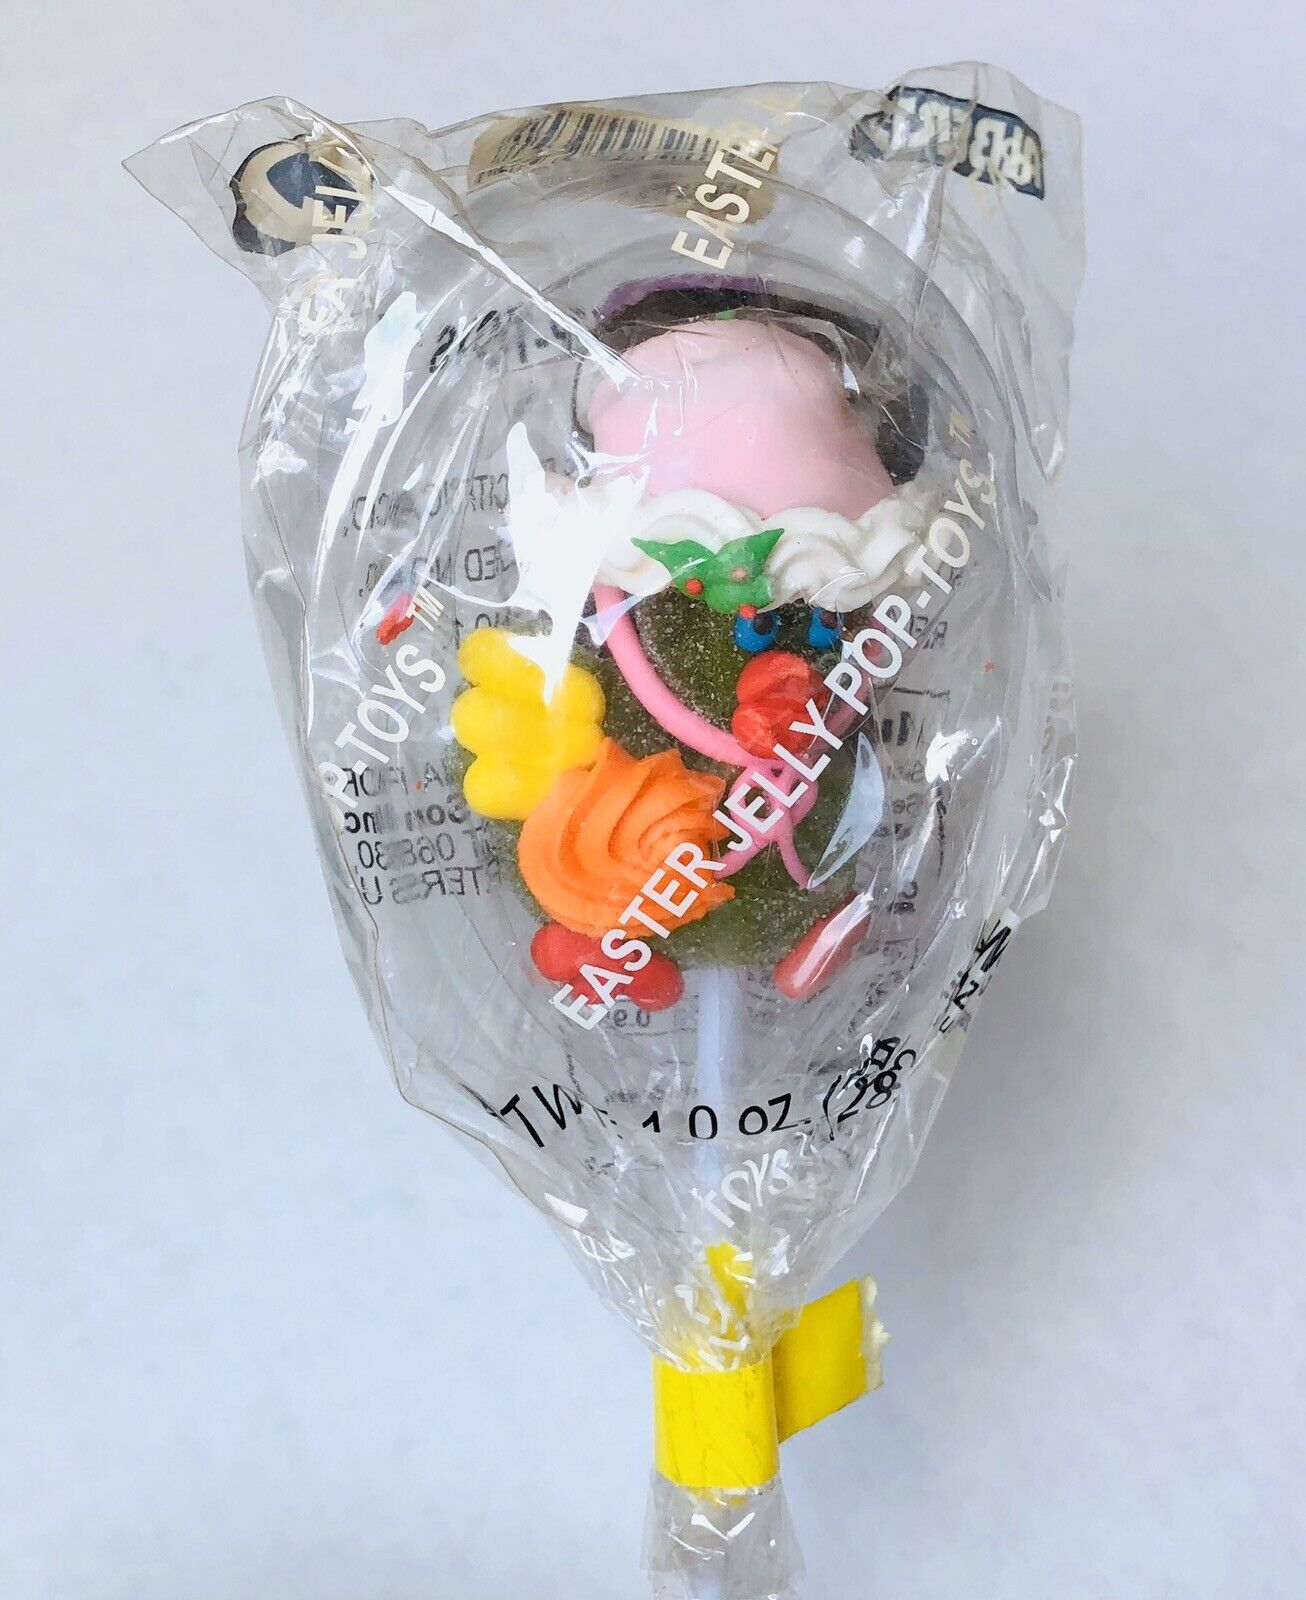 Vintage 2001 Albert’s EASTER JELLY POP TOYS Candy container 9” bubble gum SPRING